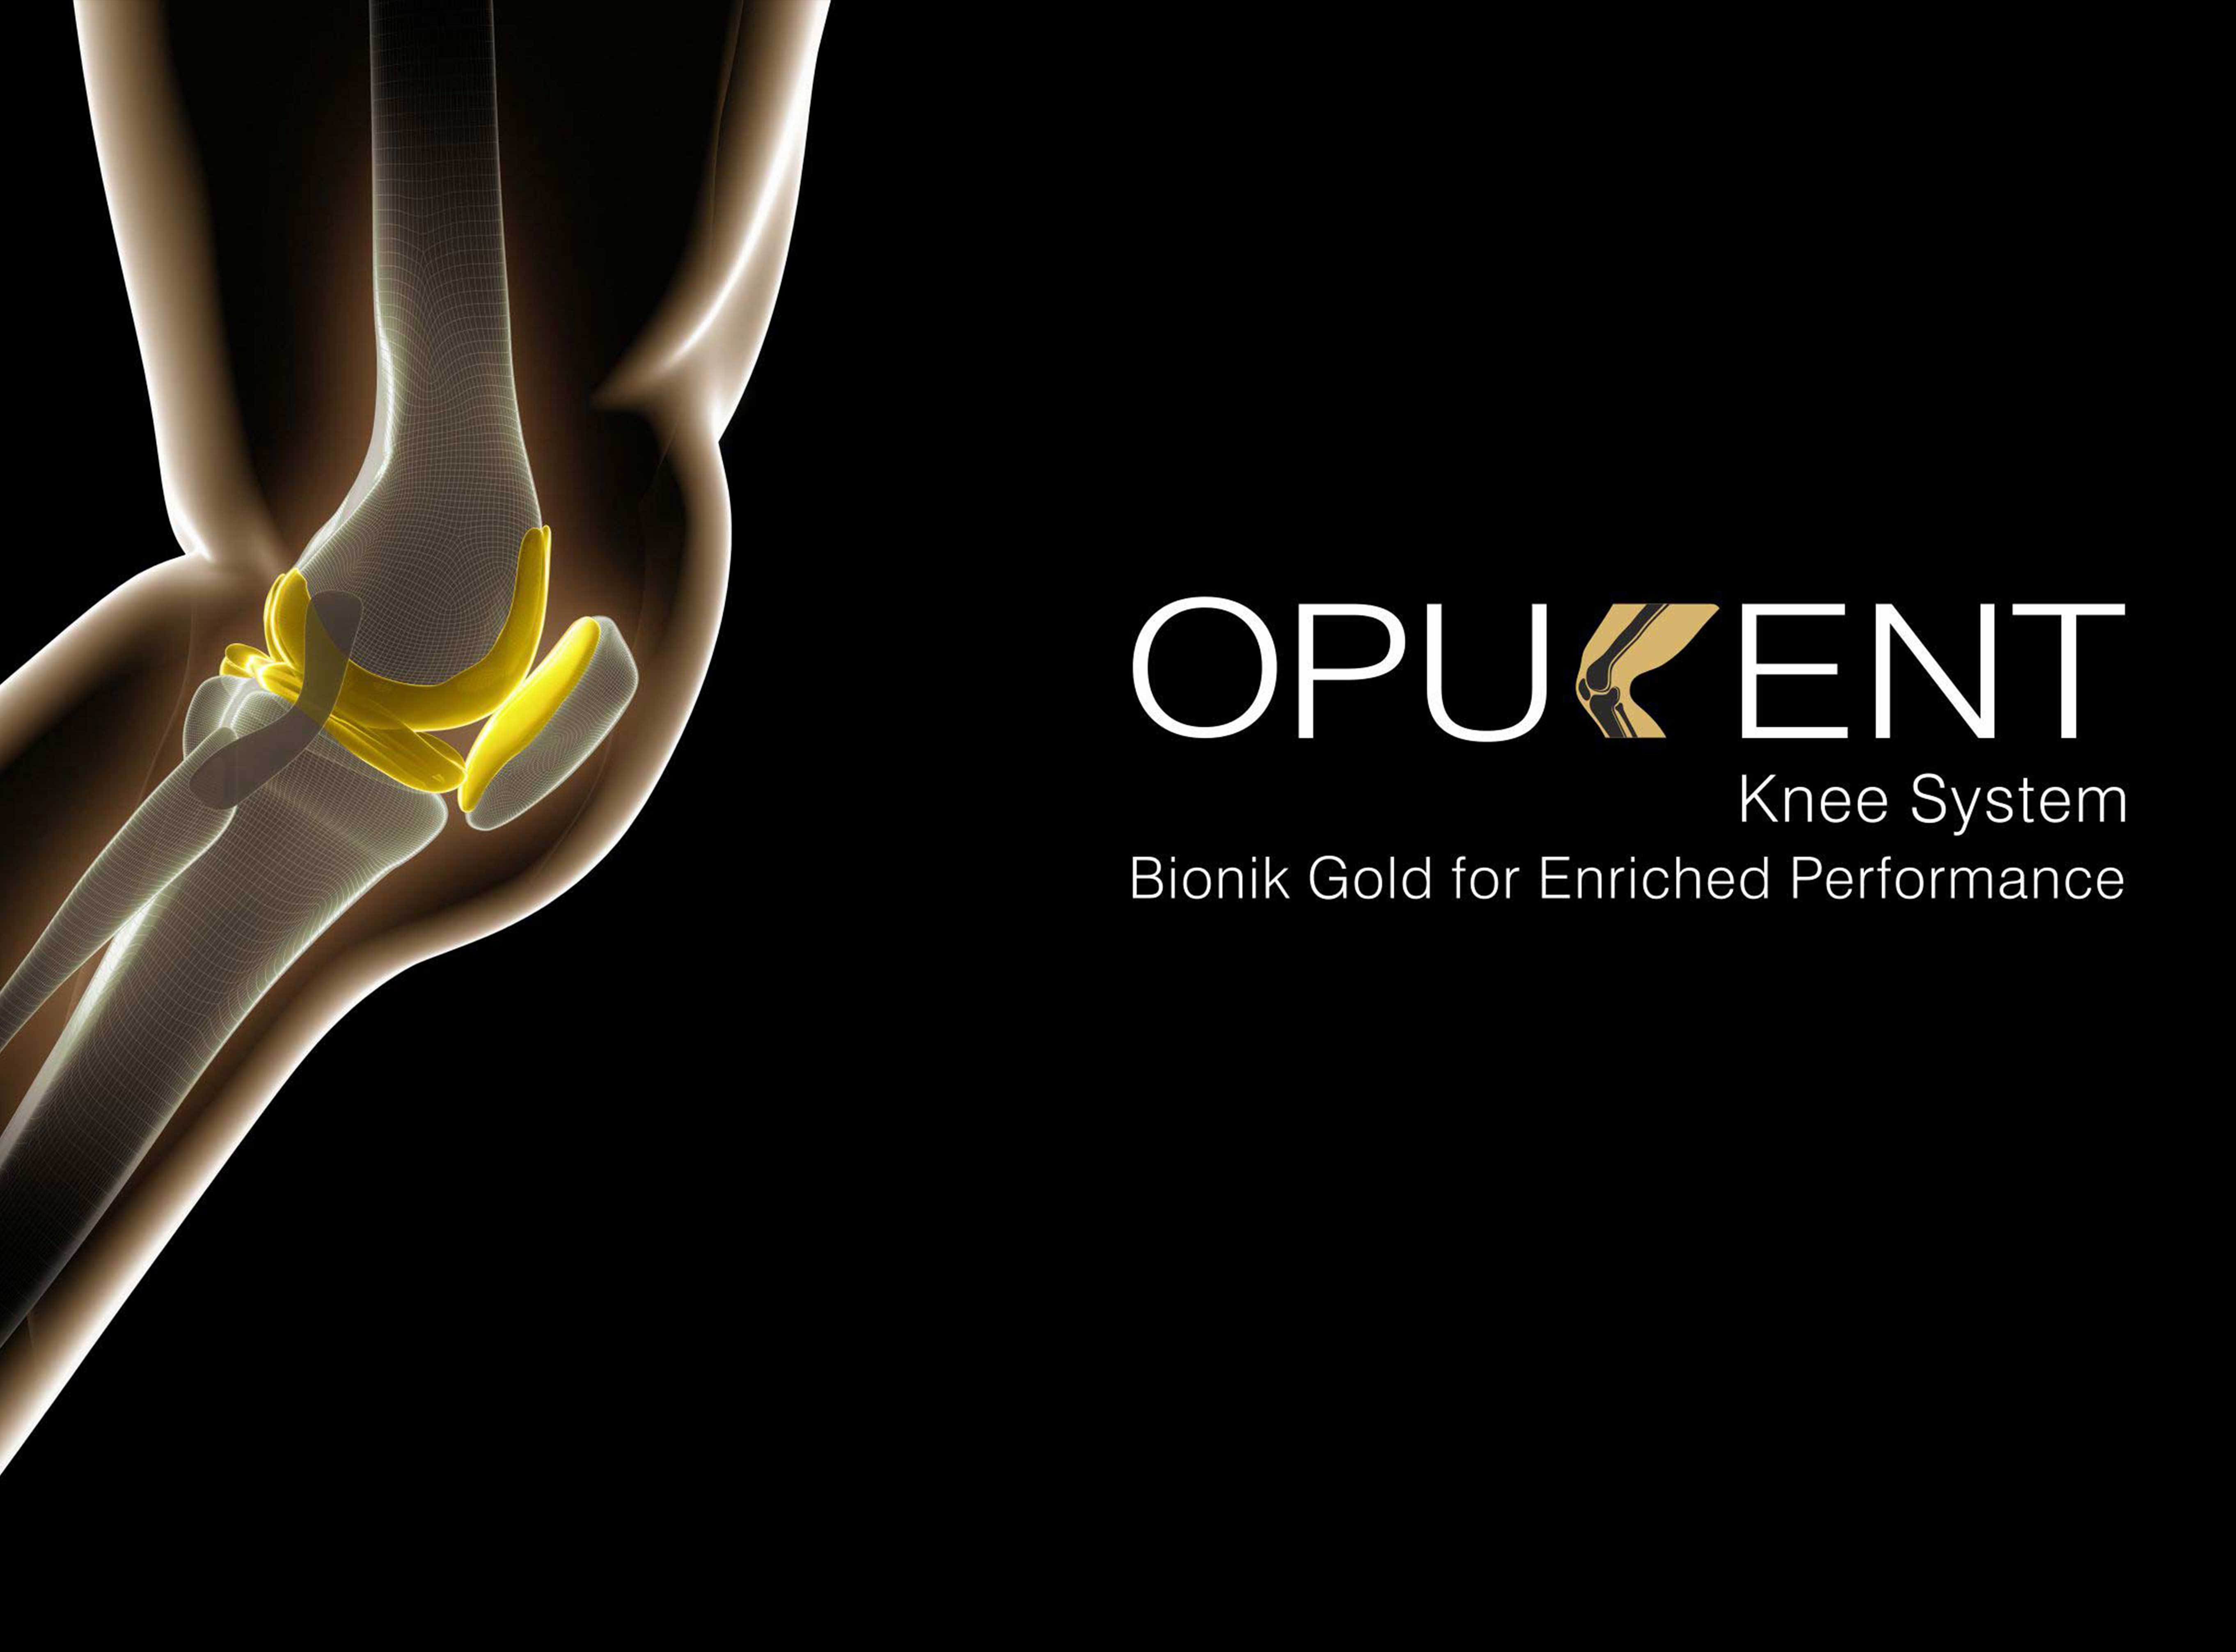 The Opulent Bionik Gold Knee: The Cutting Edge in Knee Replacement Technology